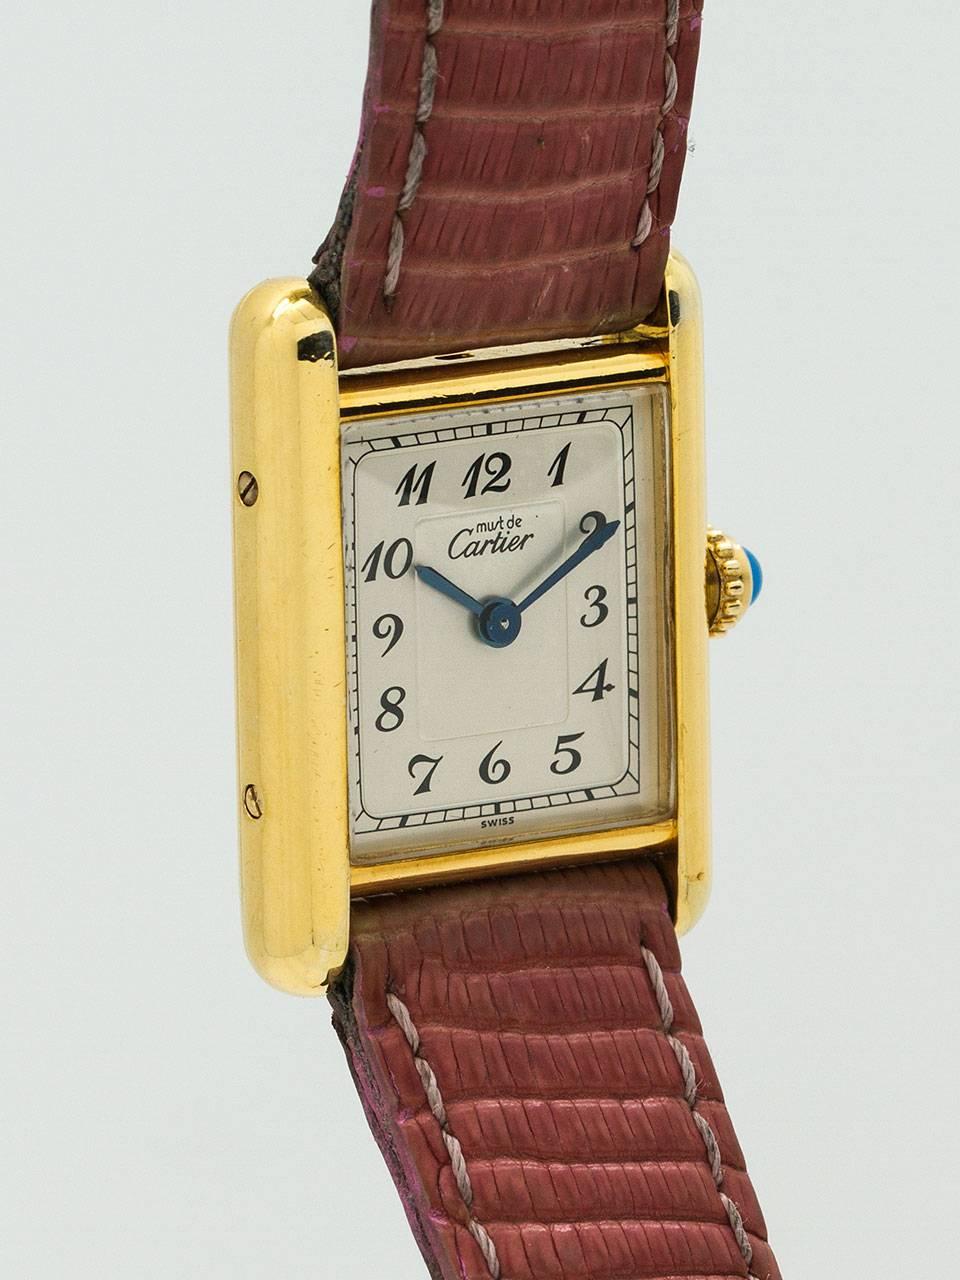 Cartier Lady’s Vermeil Tank Louis circa 1970s. 21 x 27mm case secured by 4 side and 4 case back screws. With unusual silvered dial signed Must de Cartier and with black printed Arabic figures, with blued steel hands, and blue cabochon sapphire